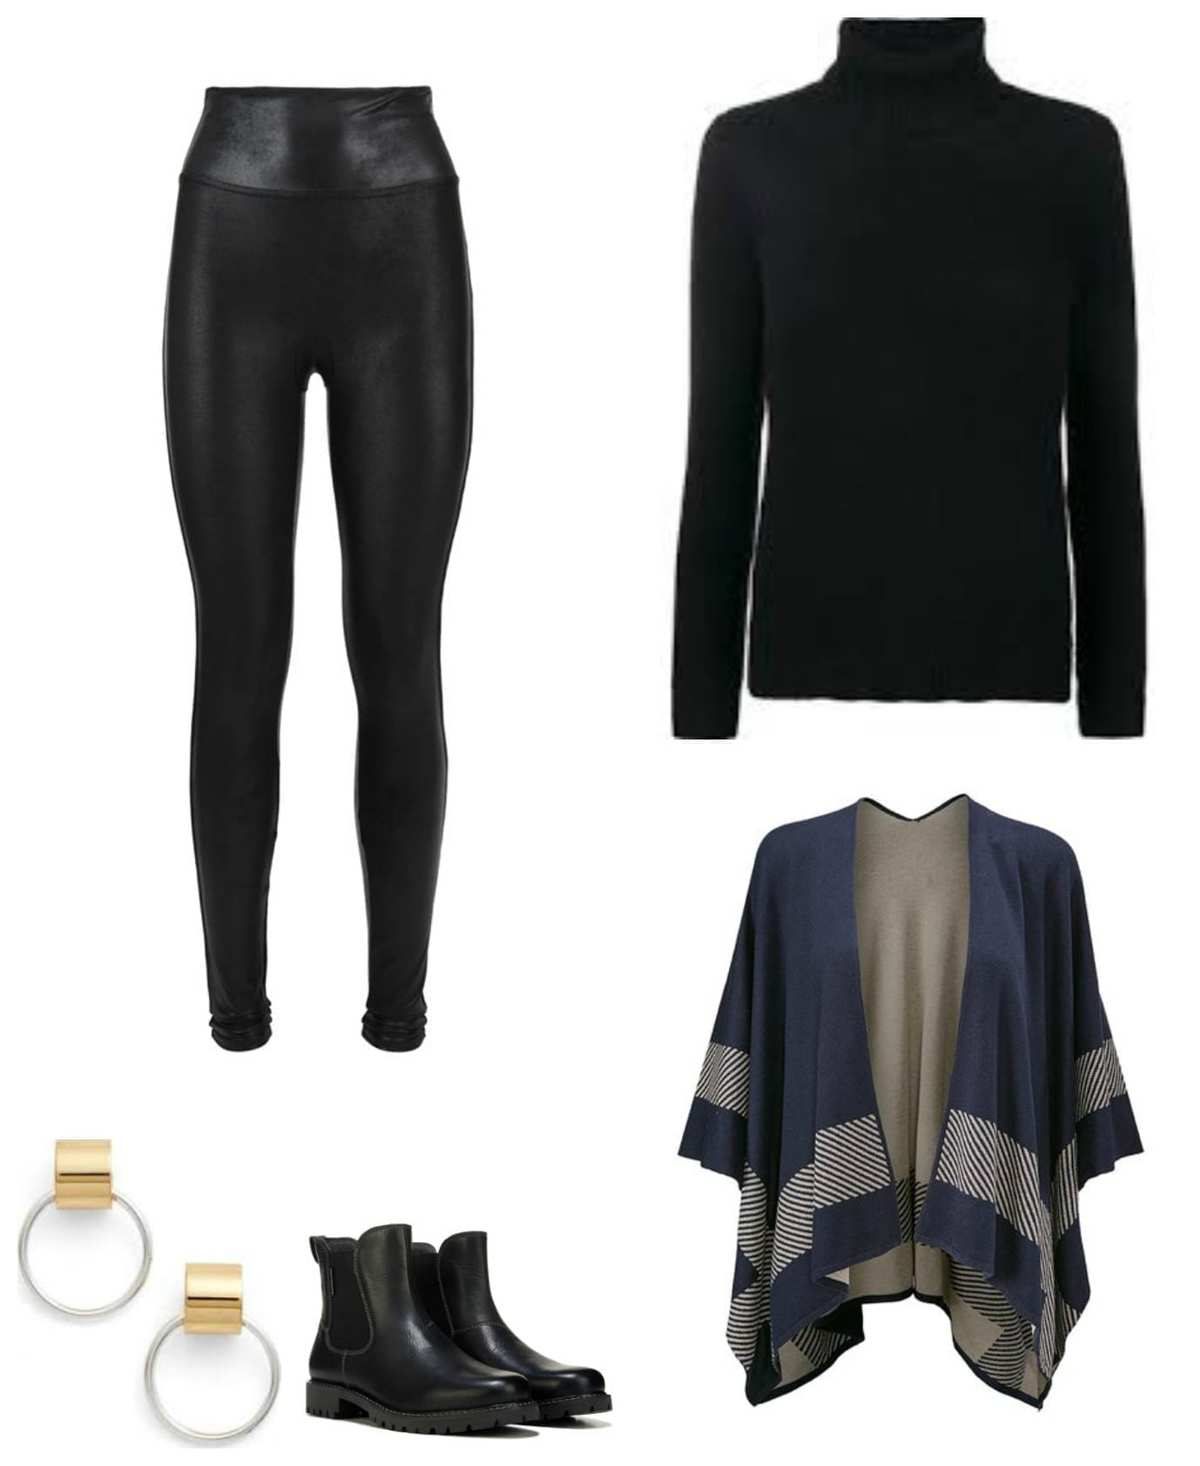 how to style a pair of faux leather front leggings